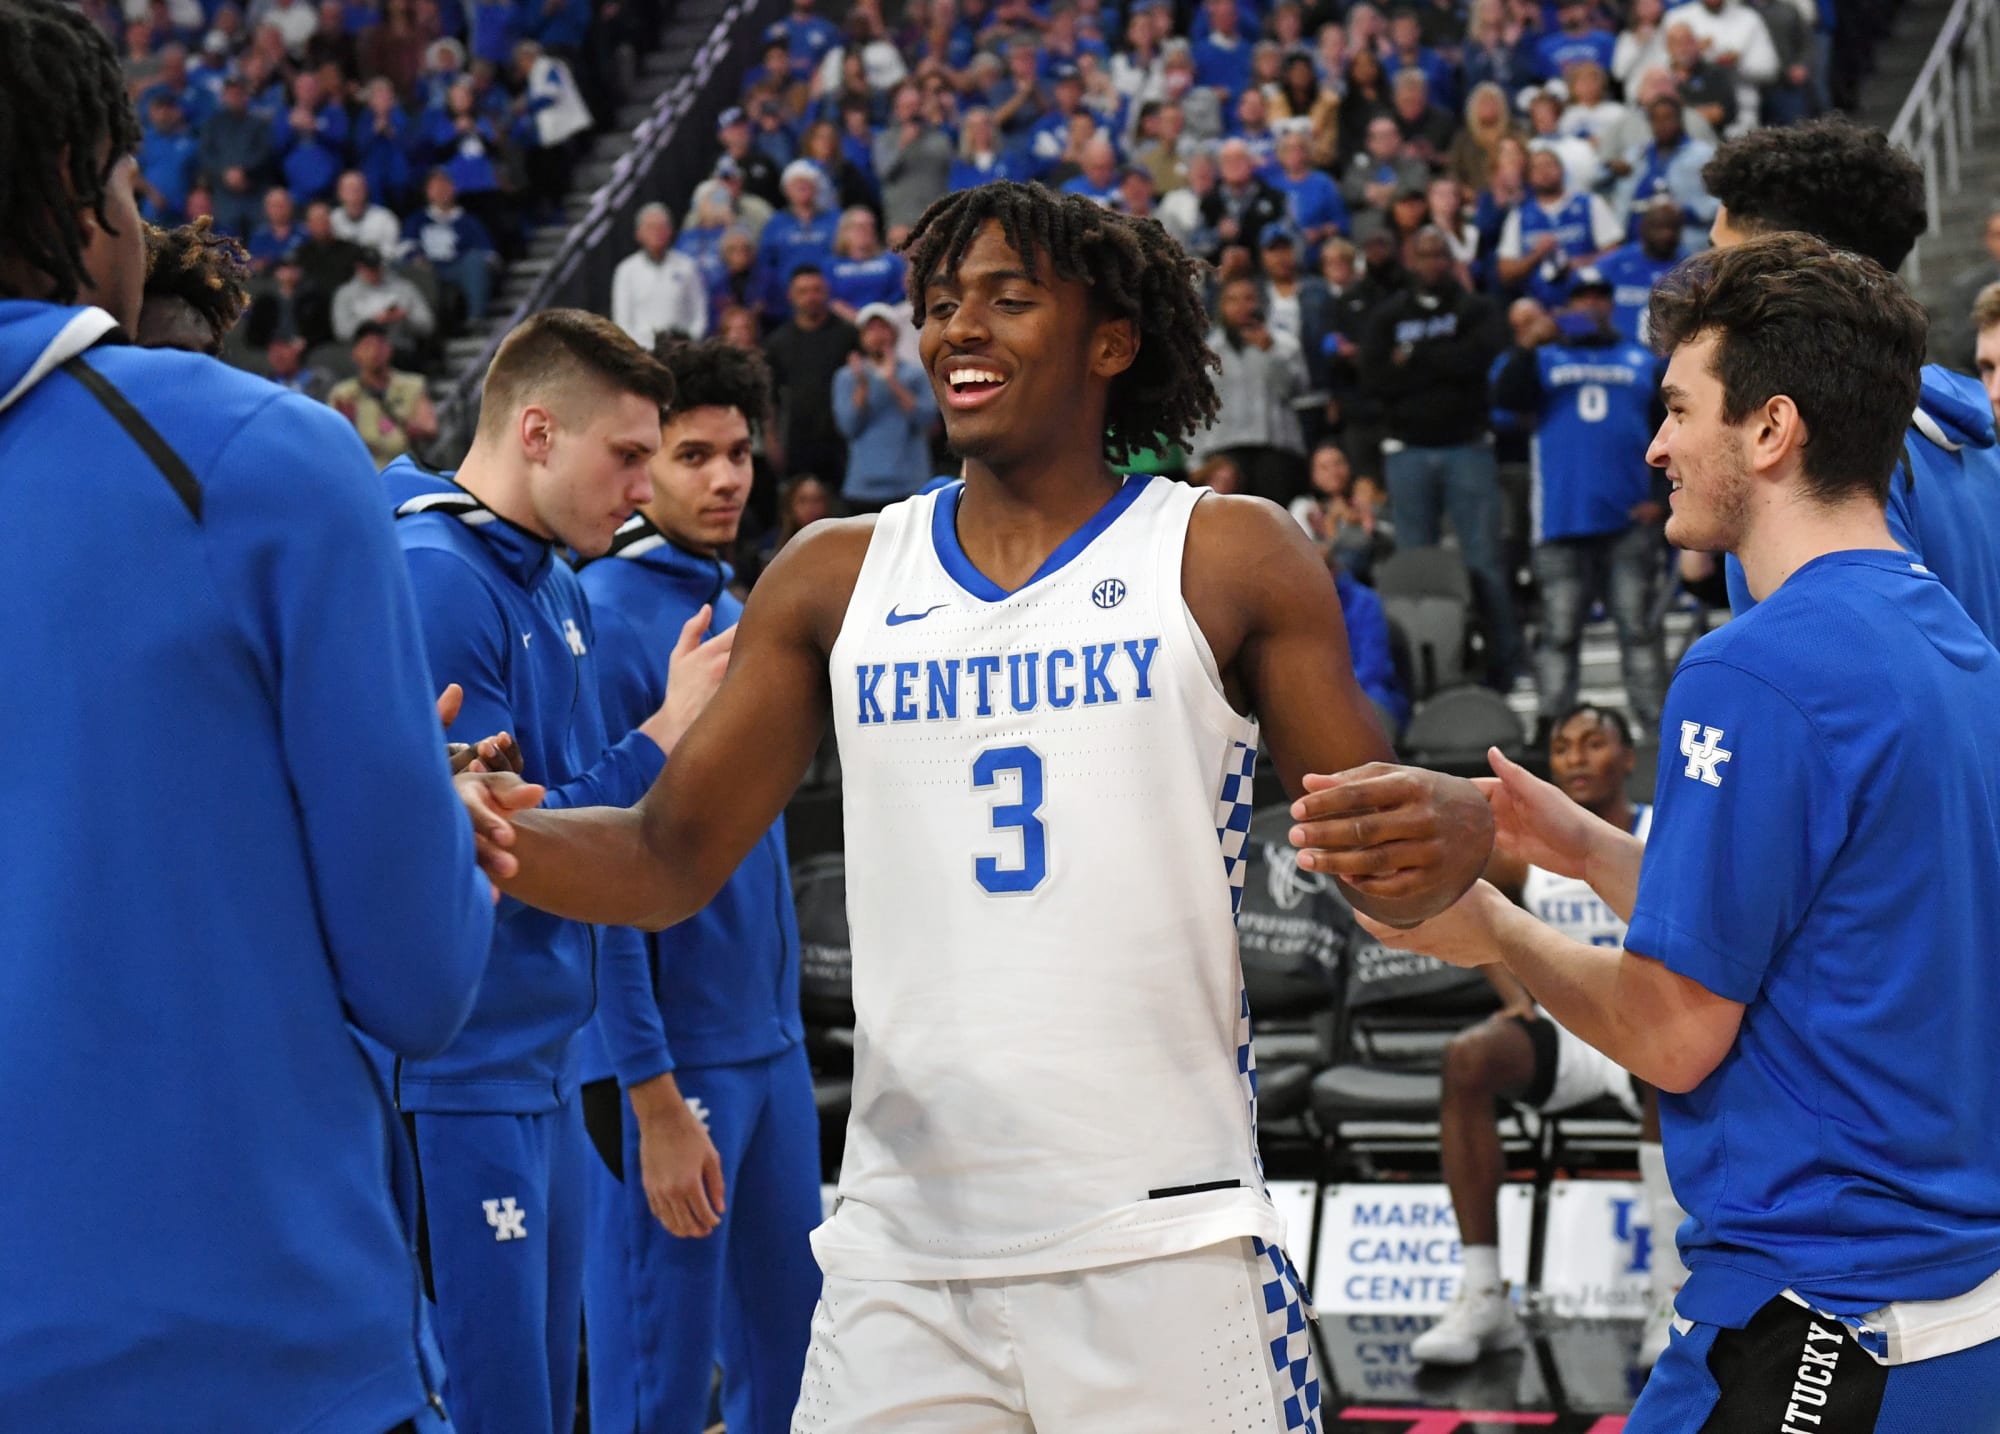 NBA Draft 2020: A surprise pick at No. 1 in the newest mock draft